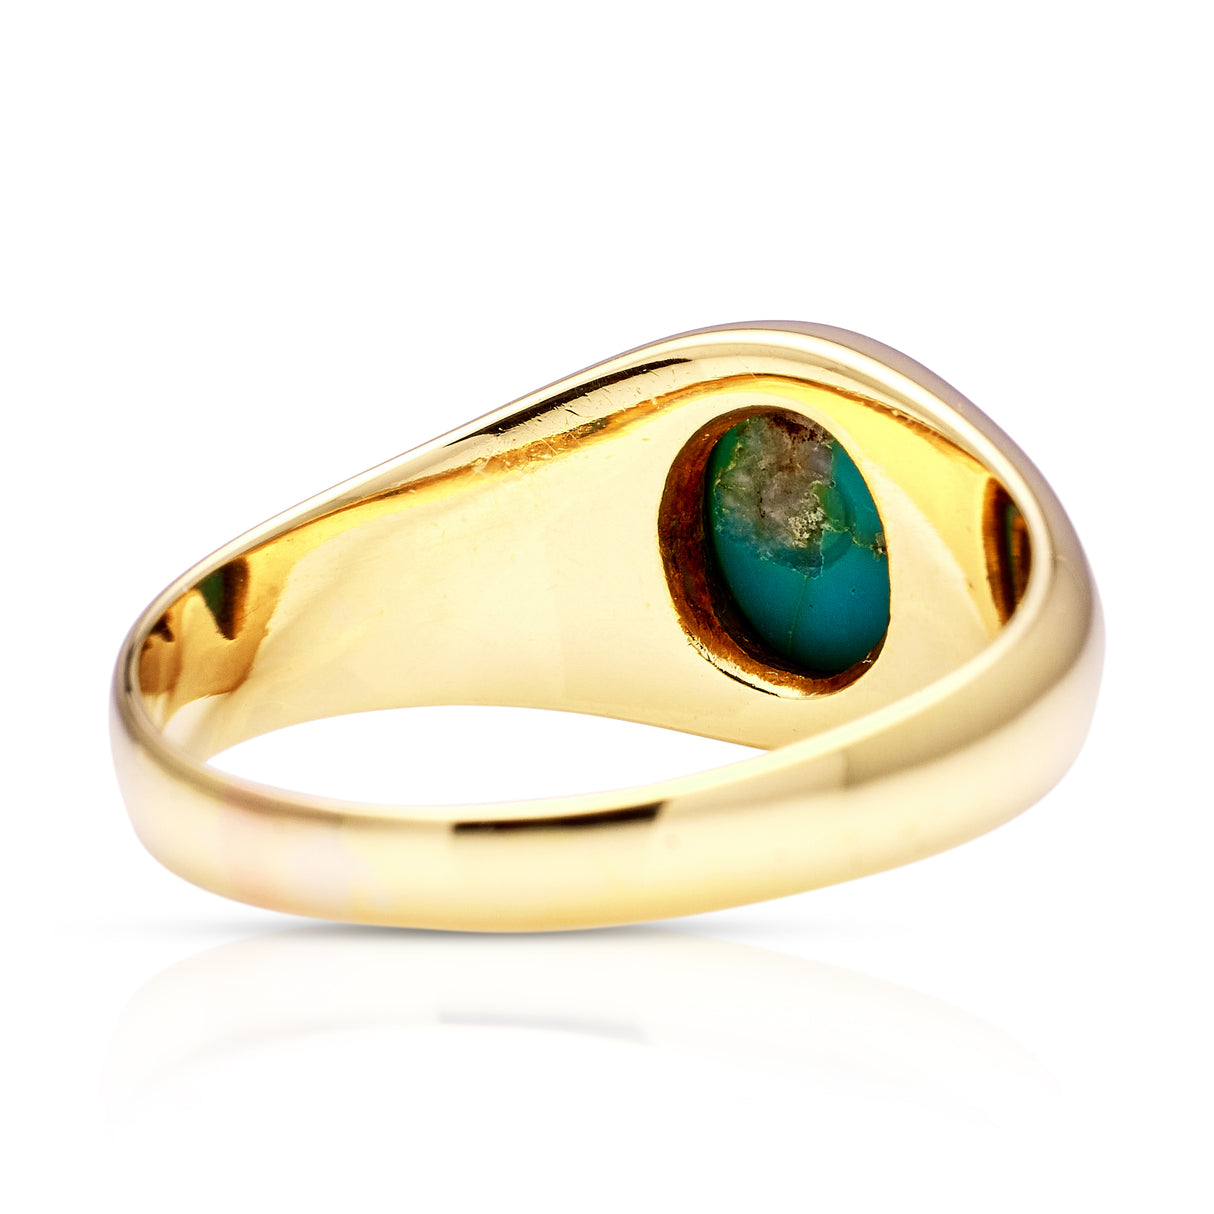 Antique, Single-Stone Turquoise Gypsy Ring, 18ct Yellow Gold rear view